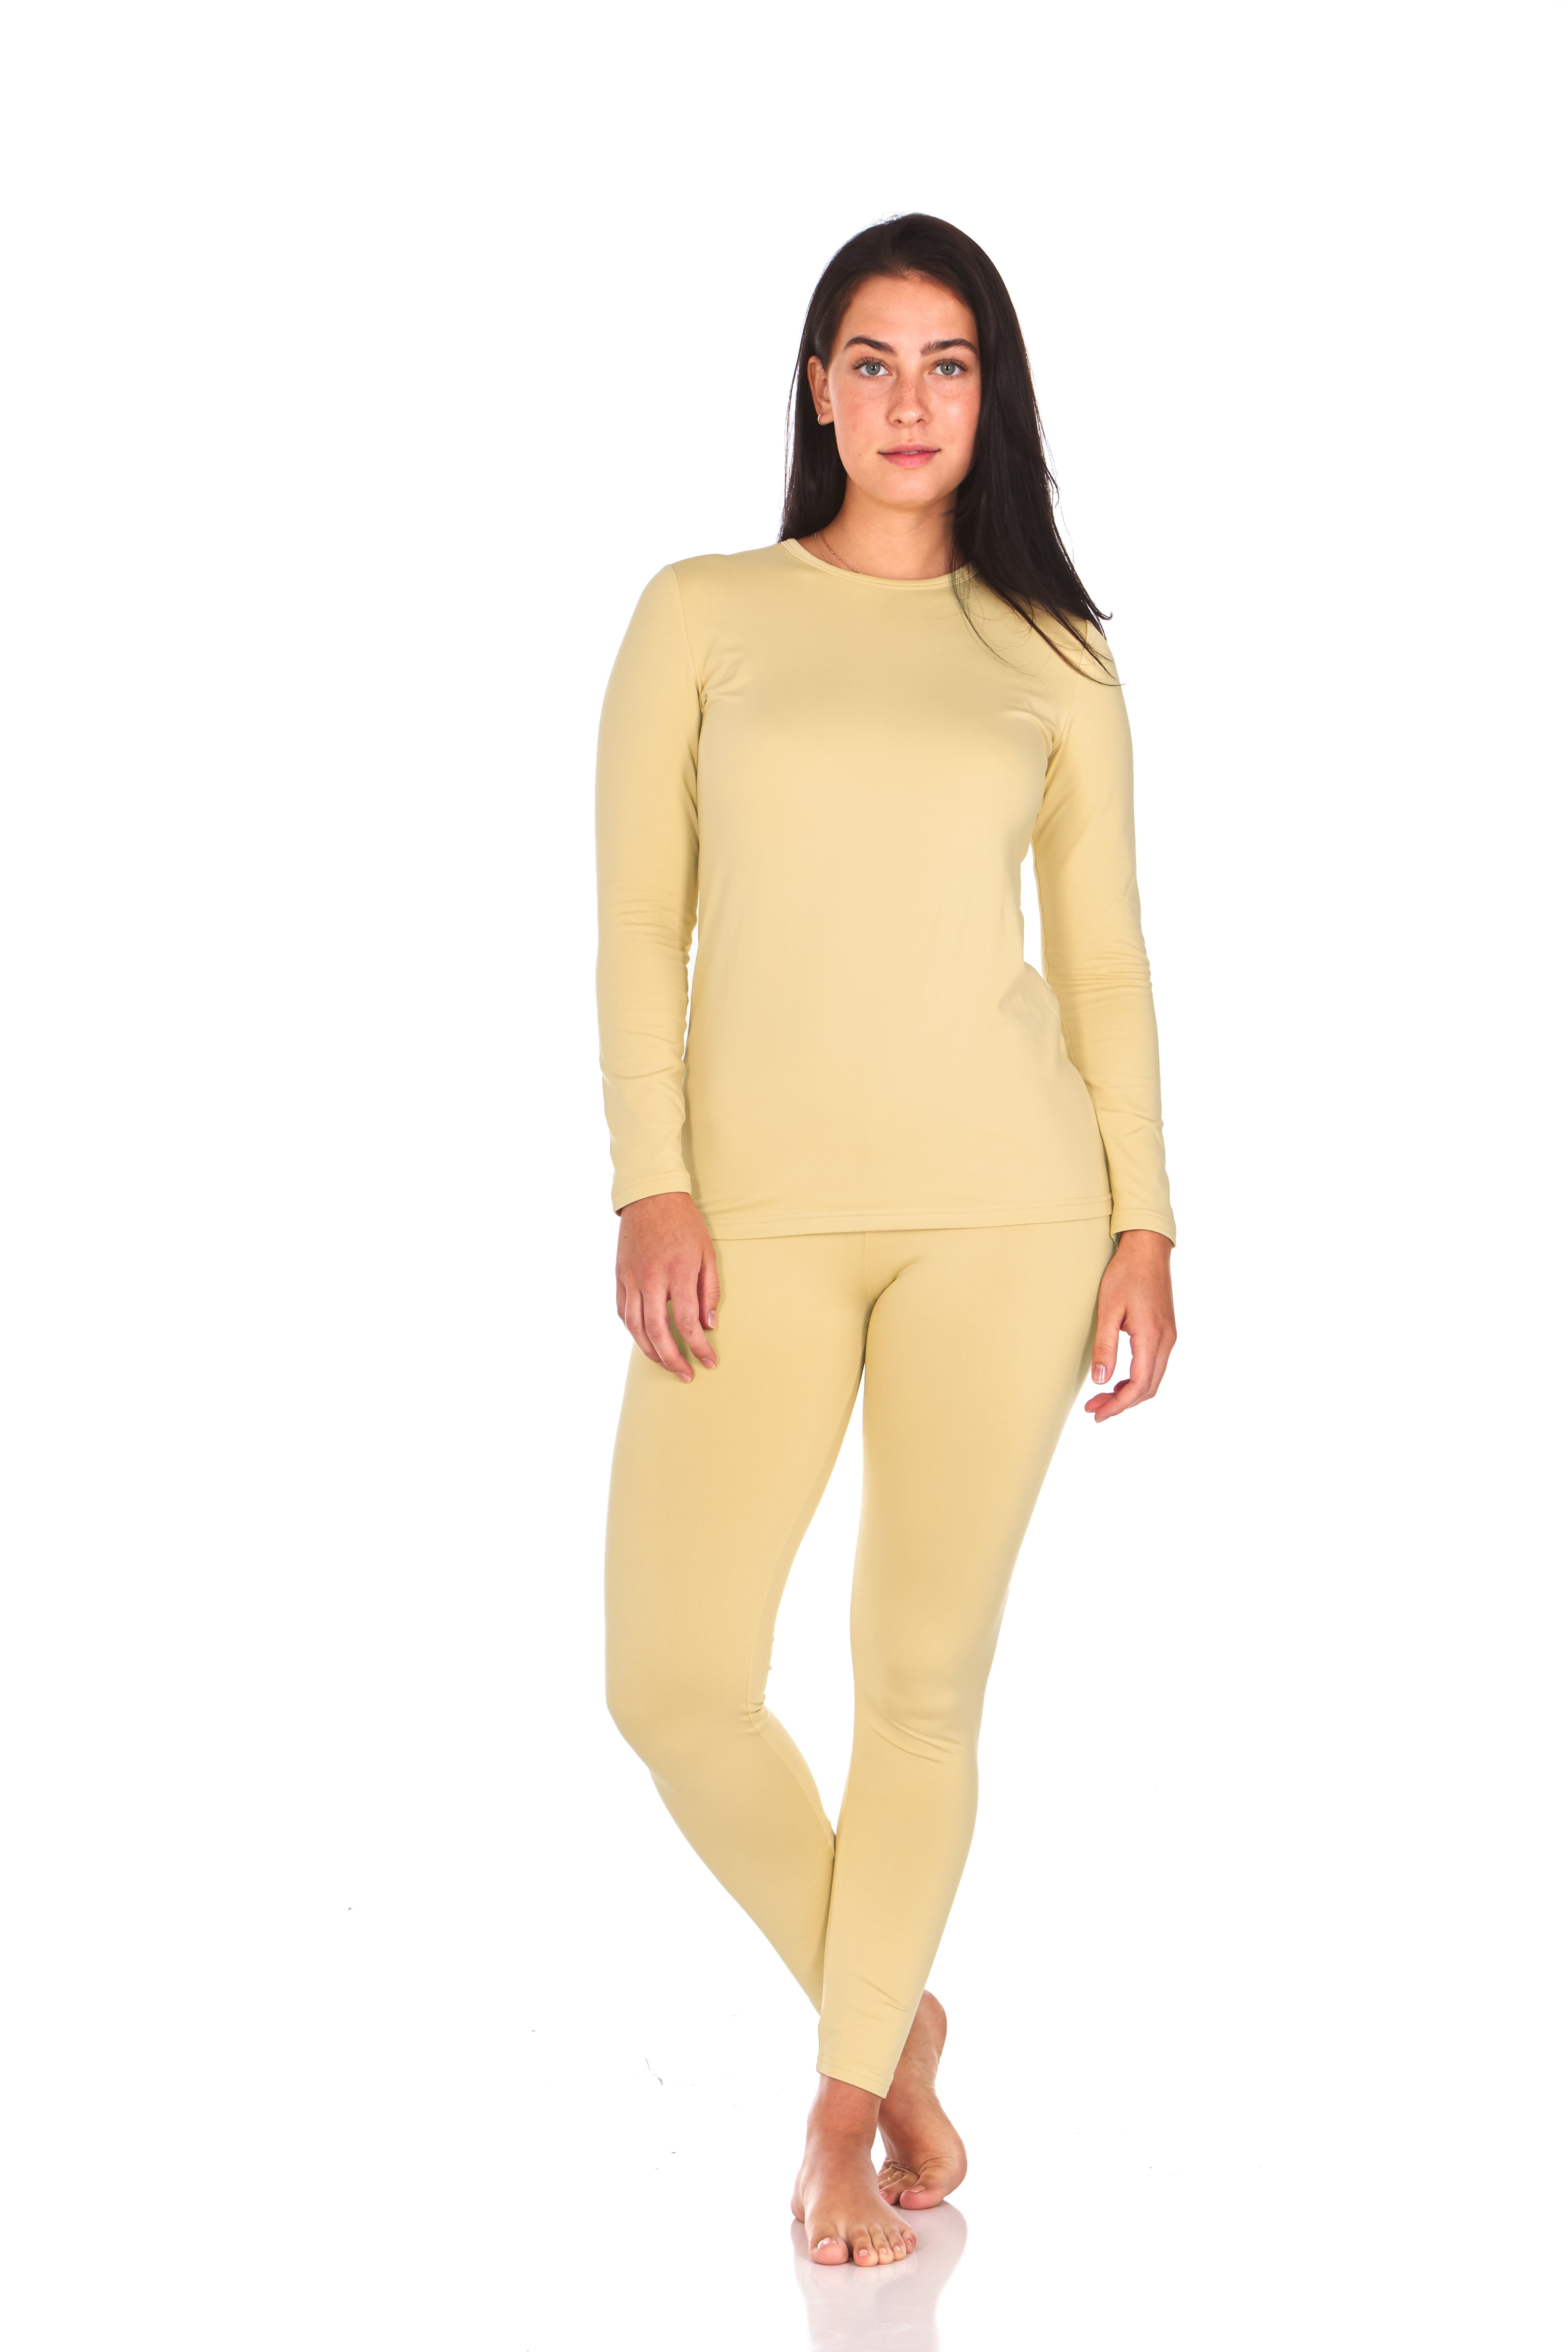 Thermajane Thermal Shirts for Women Long Sleeve India